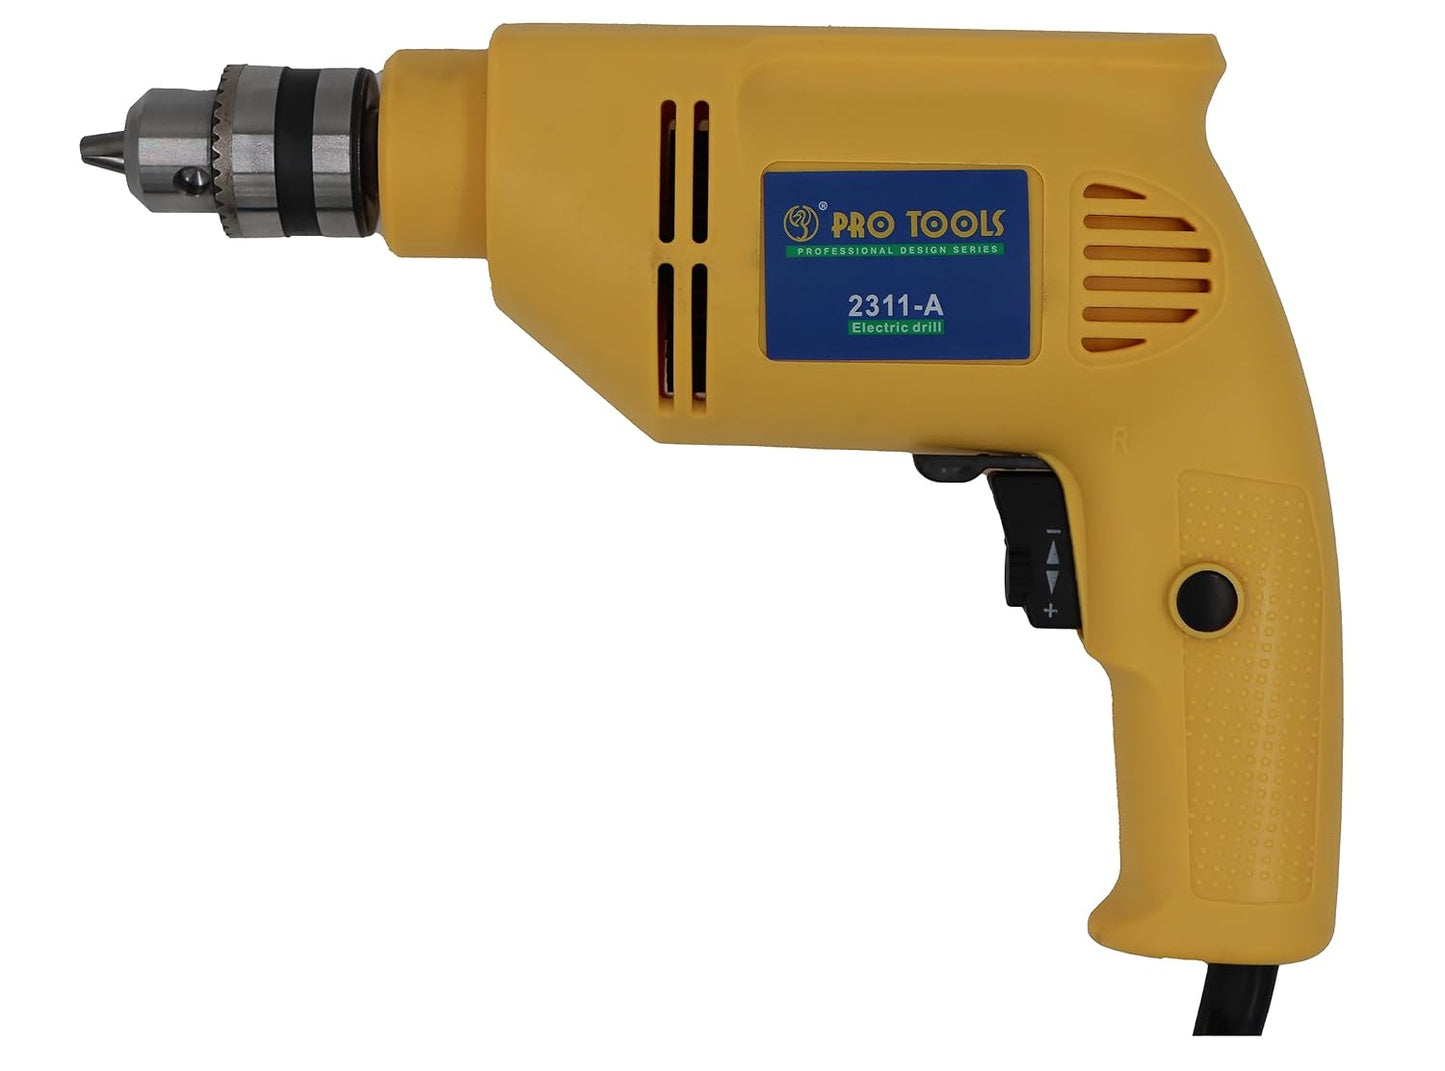 PRO TOOLS 2311-A, 10mm, 430W Electric Drill Machine, Copper Armature, 10mm Chuck, 2800 RPM, 2 Mode Selector, Forward/Reverse with Variable Speed with 5 Pieces Bits